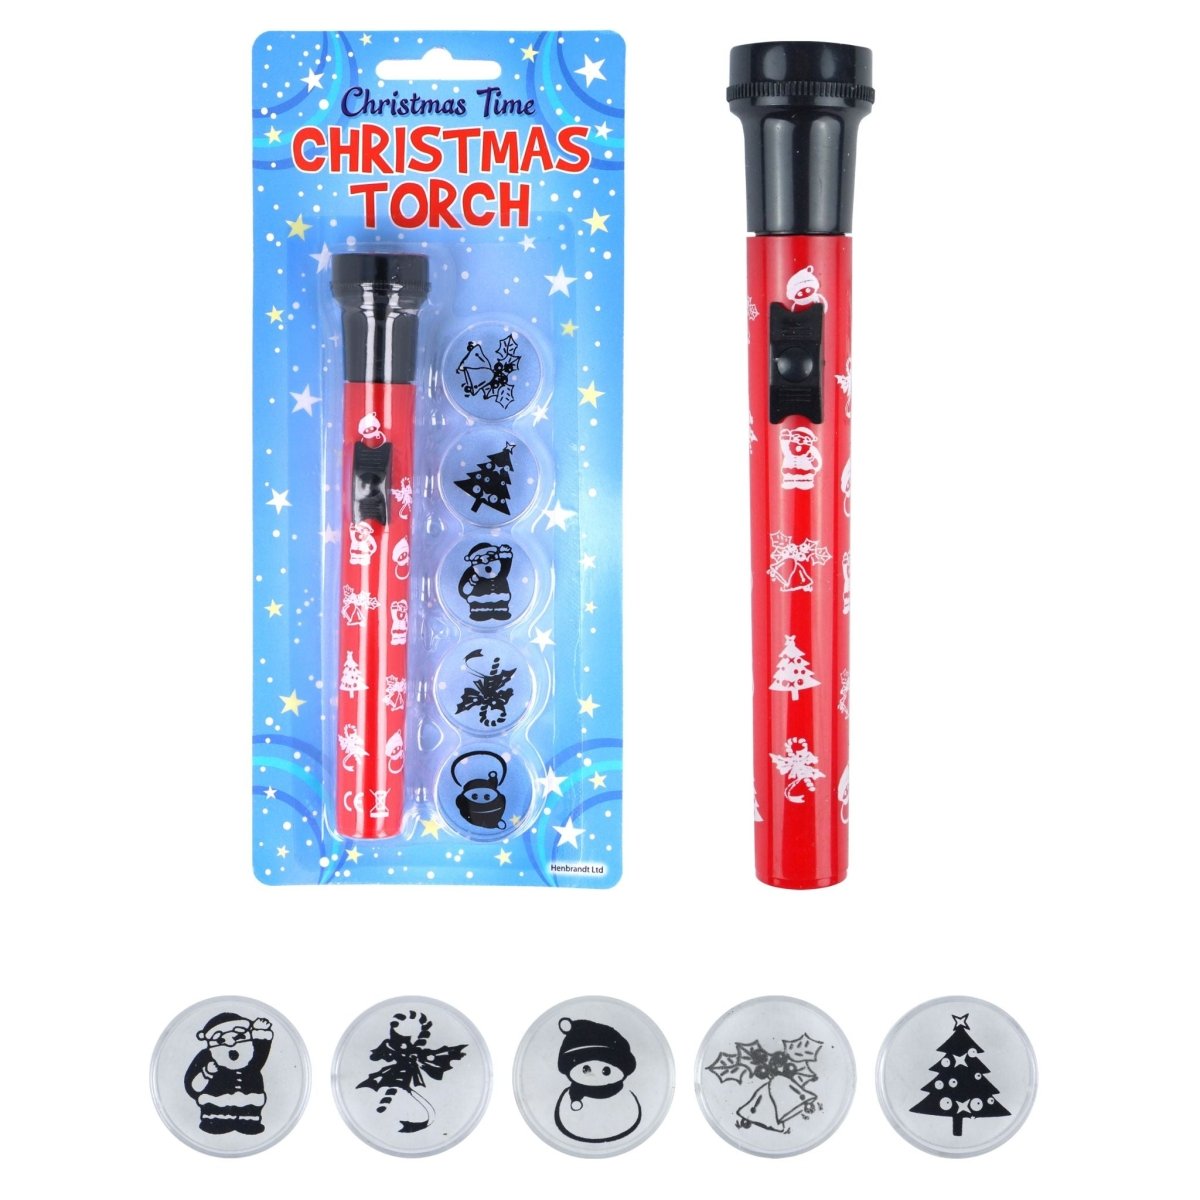 Christmas Torch with 5 Image Covers - Kids Party Craft